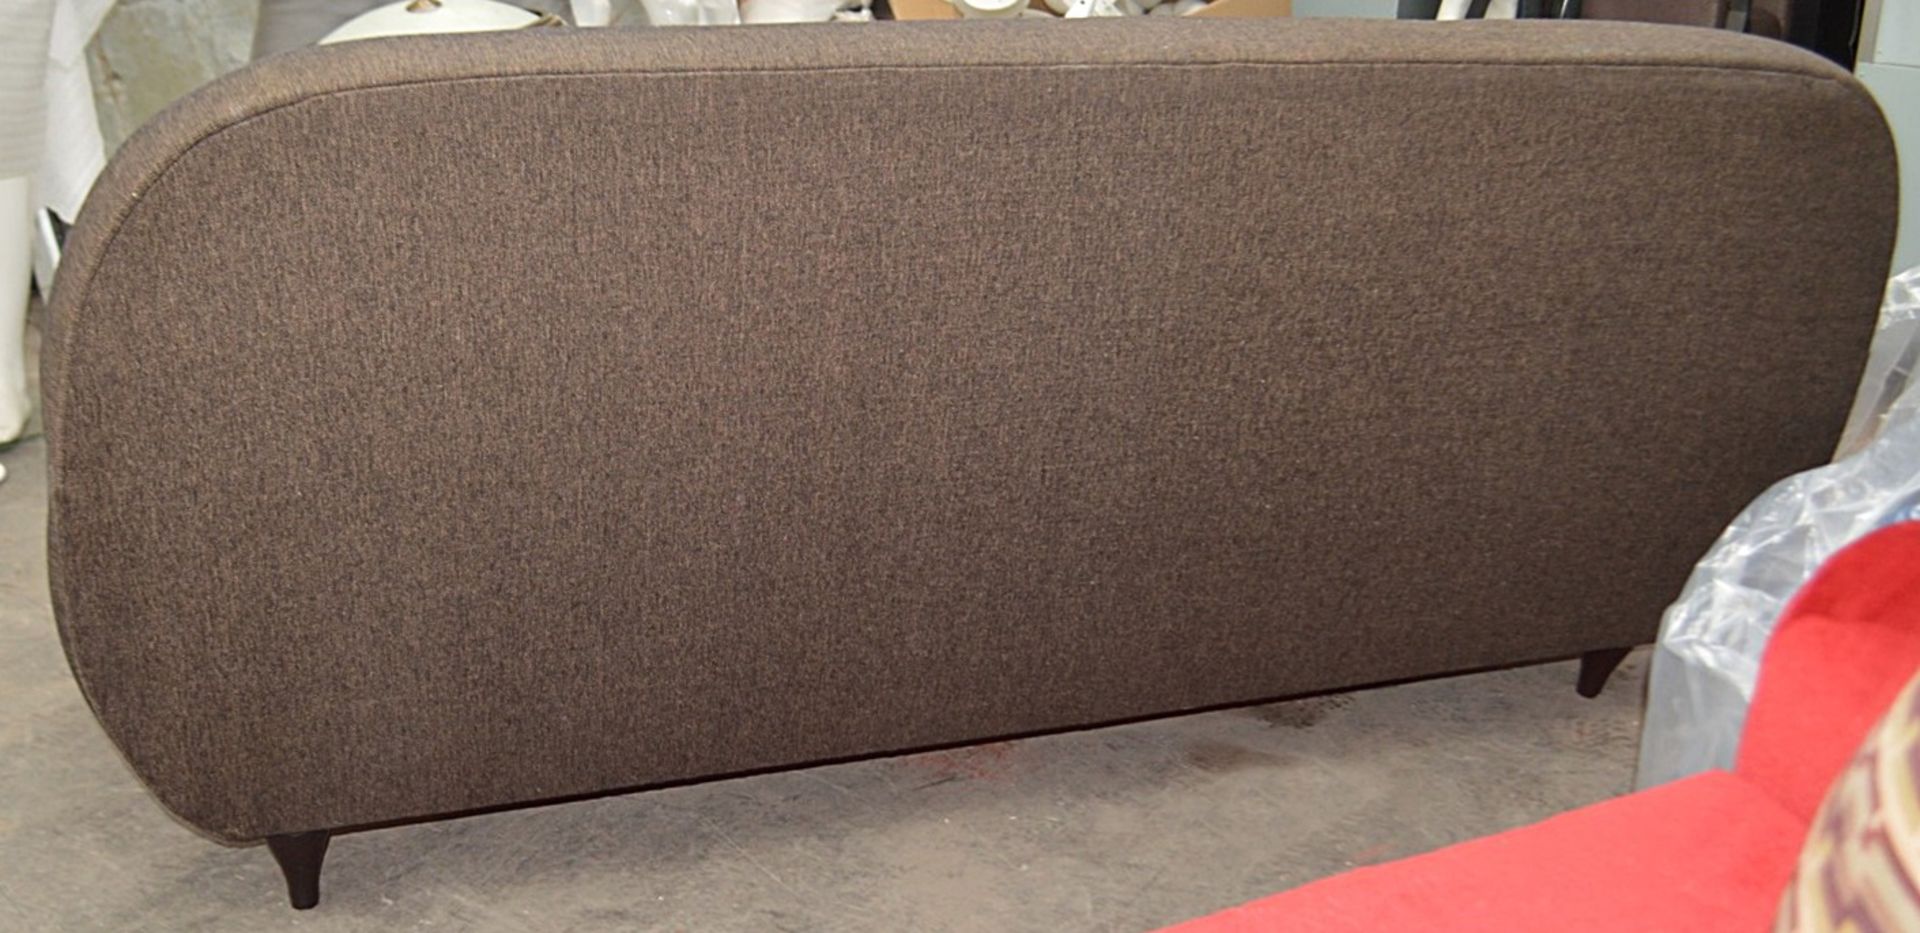 1 x Large Commercial 2-Metre Long Contemporary Sofa In A  Dark Brown/Bronze Woven Fabric - - Image 5 of 6